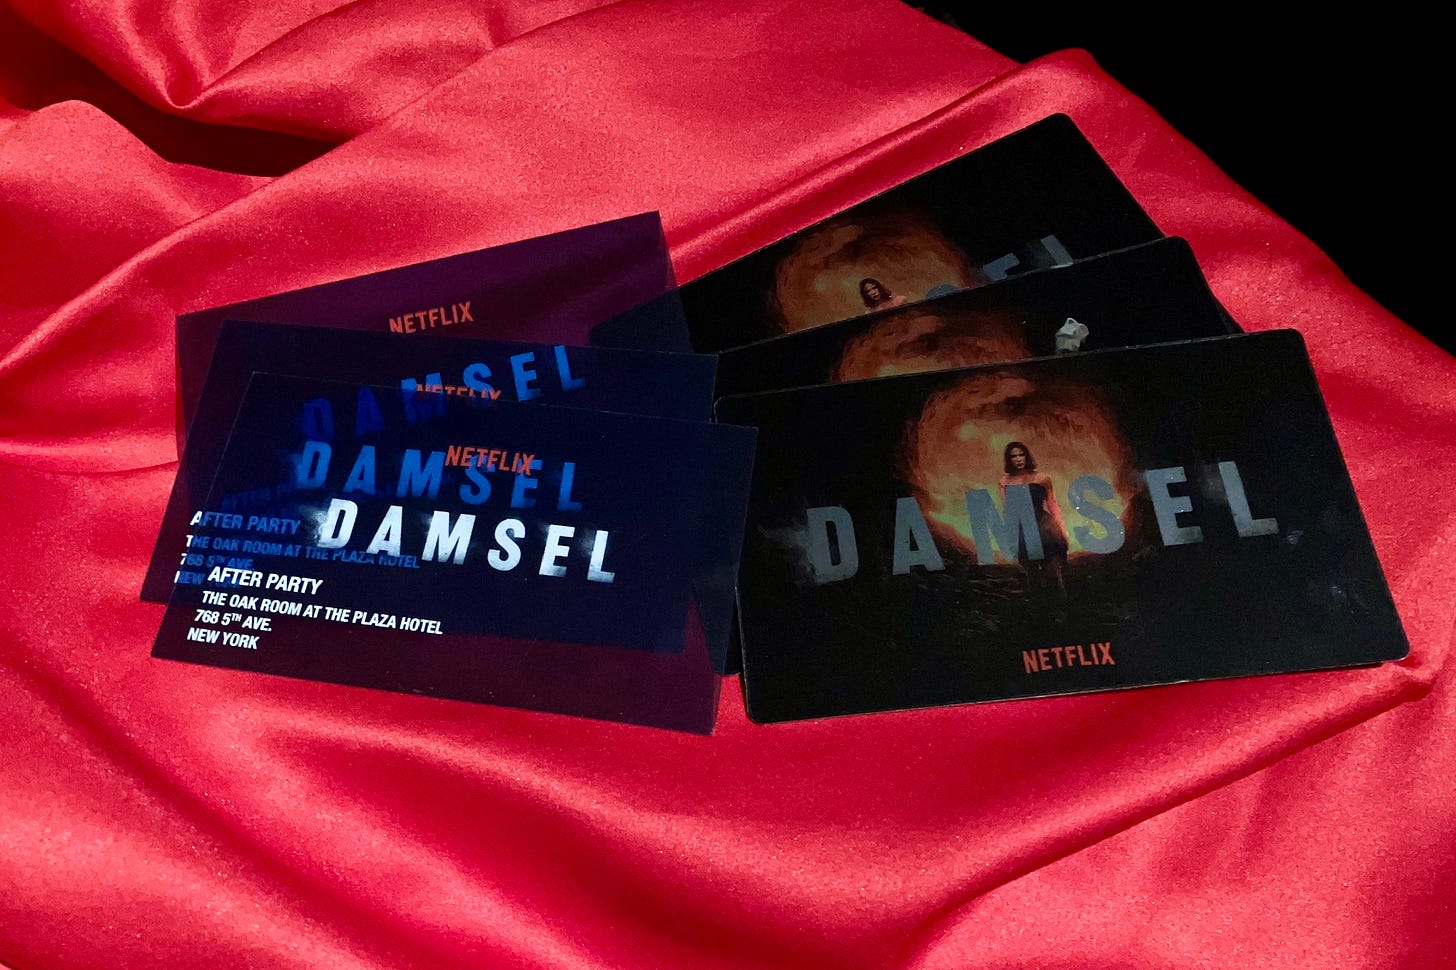 Tickets to the Damsel World Premiere in New York City